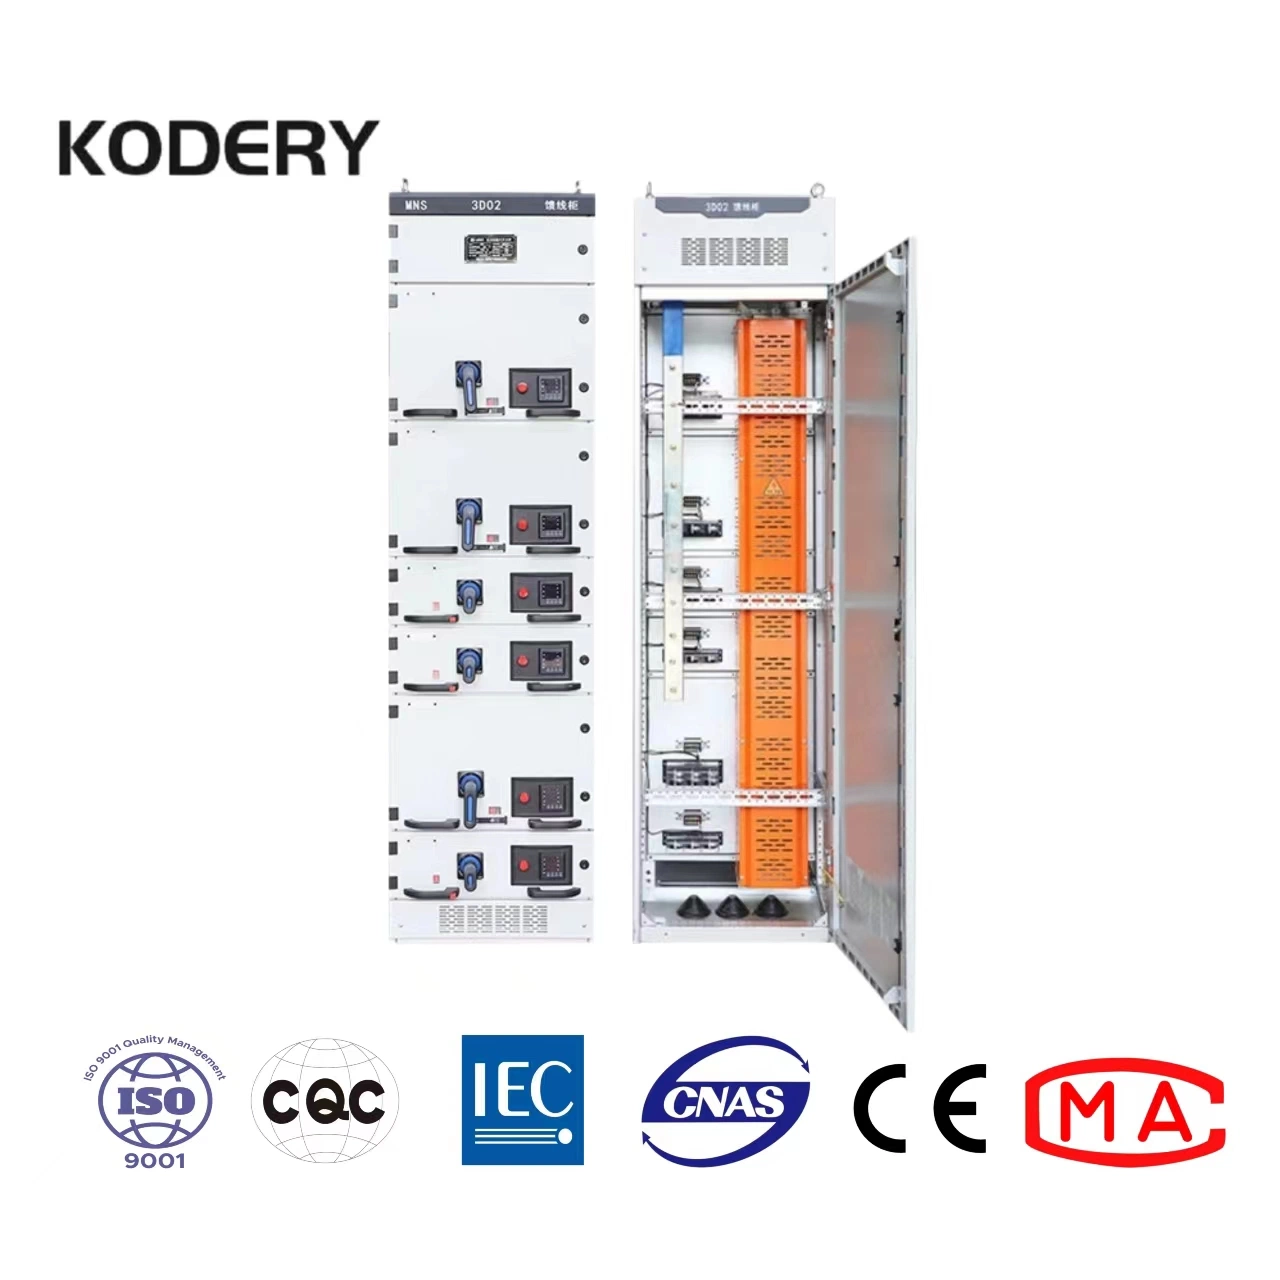 Kodery Multifunctional Low Voltage Protection Panel Equipment Industrial Electrical Draw out Switchgear Suntree Mns Panel for Power Distribution 400V 690V